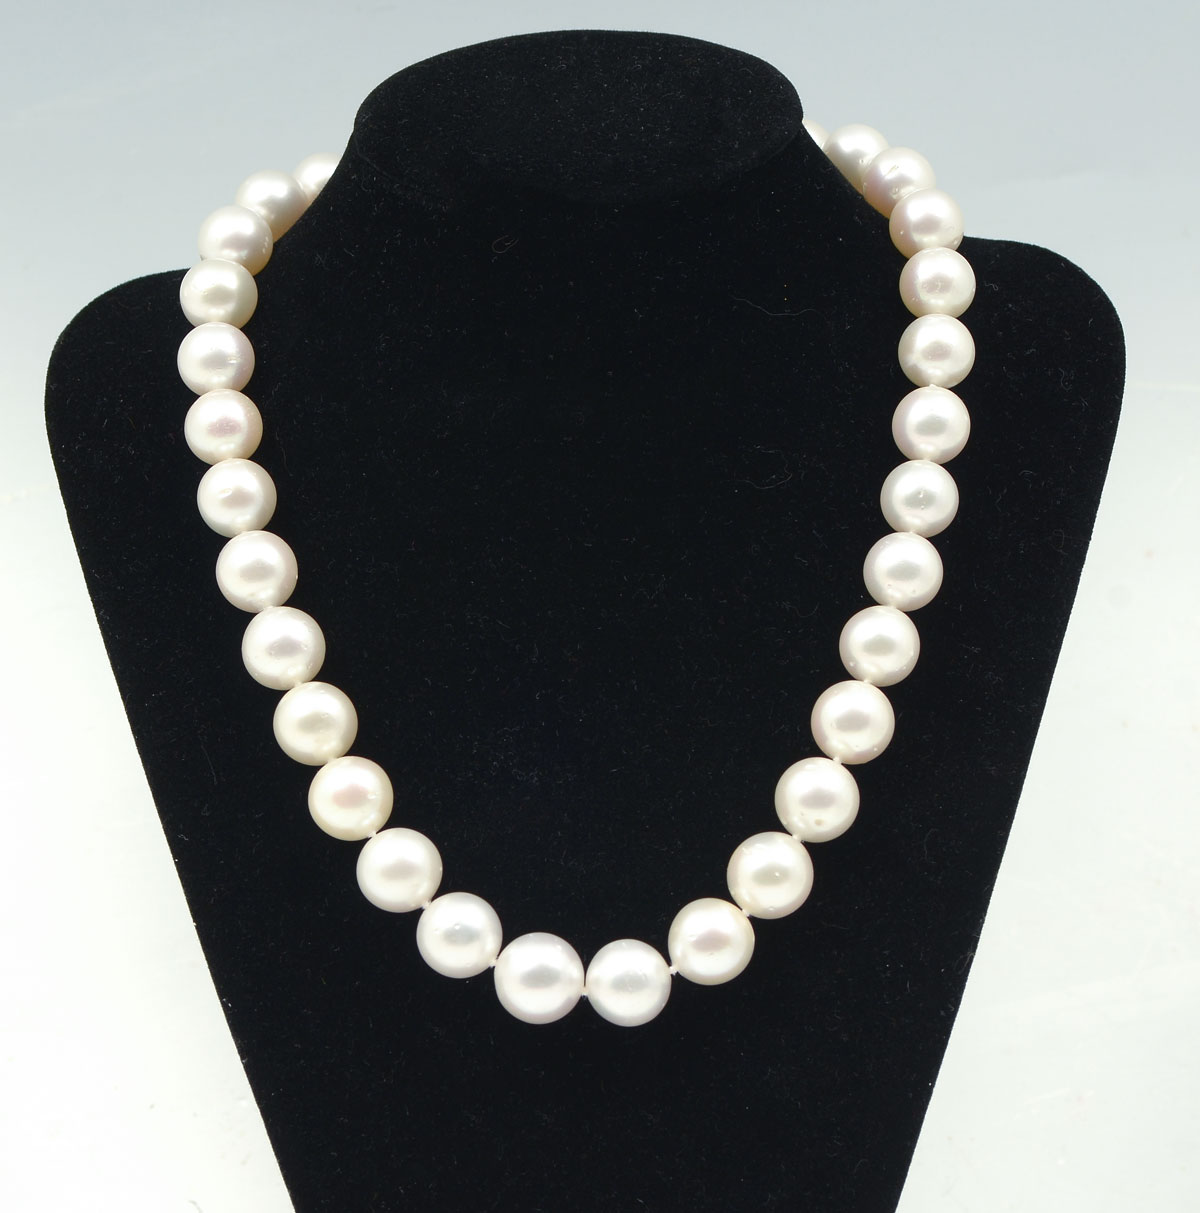 WHITE SOUTH SEA PEARL NECKLACE: